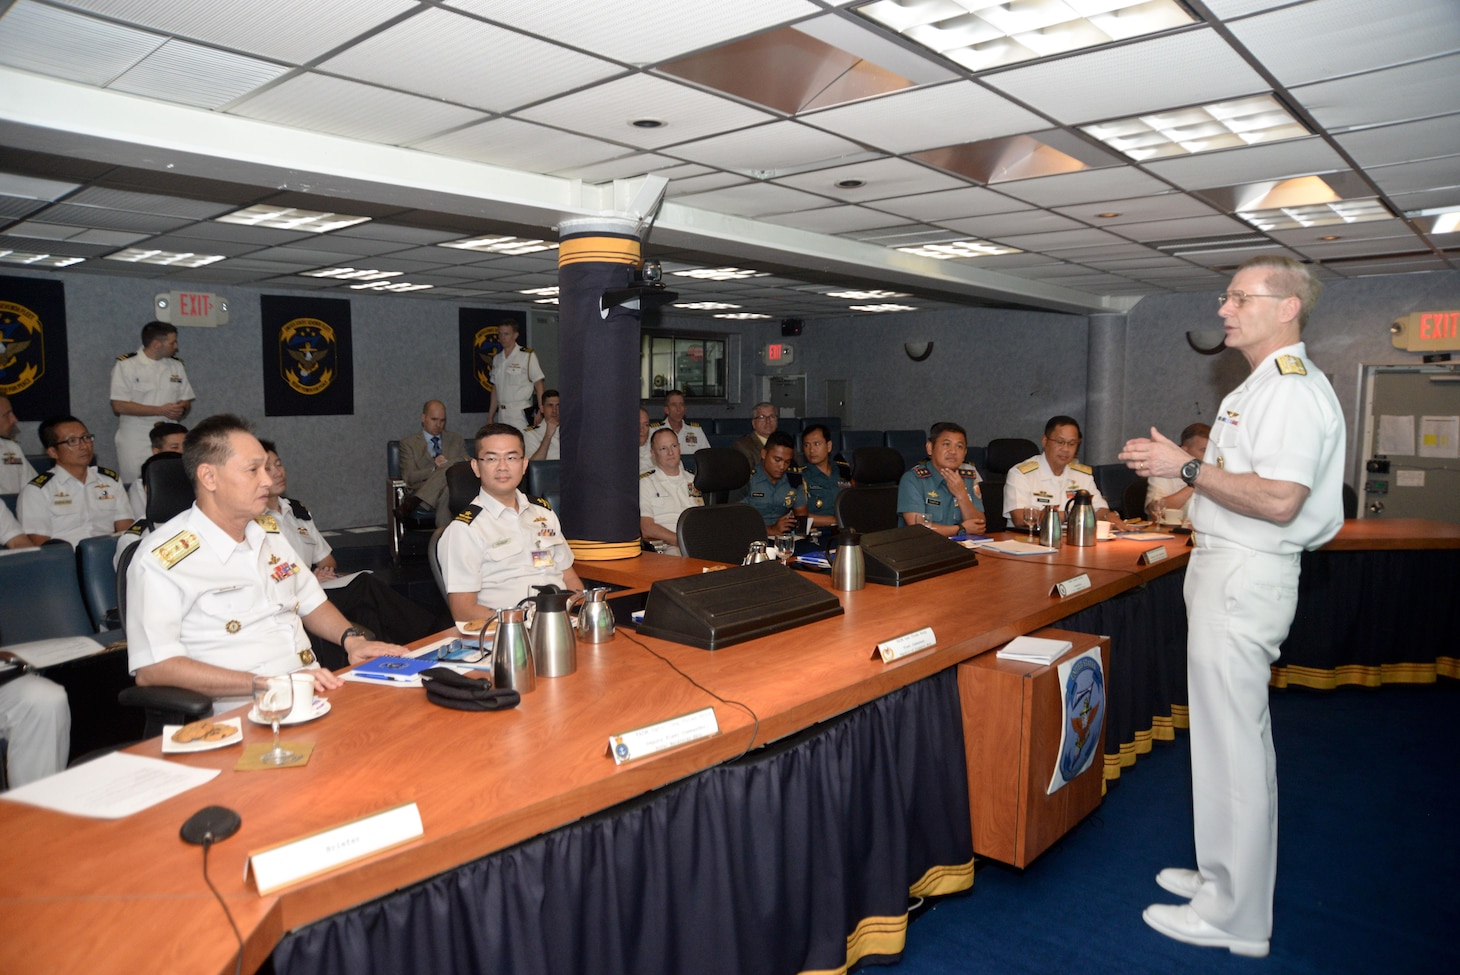 160319-N-CZ848-024
CHANGI, Singapore (Mar. 19, 2016) – Vice Adm. Joseph Aucoin, commander, U.S. 7th Fleet, right, addresses senior leaders from U.S., Republic of Singapore, Tentara Nasional Indonesia-Angkatan Laut, Royal Malaysian and Philippine navies during multilateral talks aboard USS Blue Ridge (LCC 19). The multilateral talks are being held to enhance cooperation and strengthen relationships to best provide security and stability in the Indo-Asia Pacific. (U.S. Navy photo by Mass Communication Specialist 2nd Class Jason Kofonow/Released)